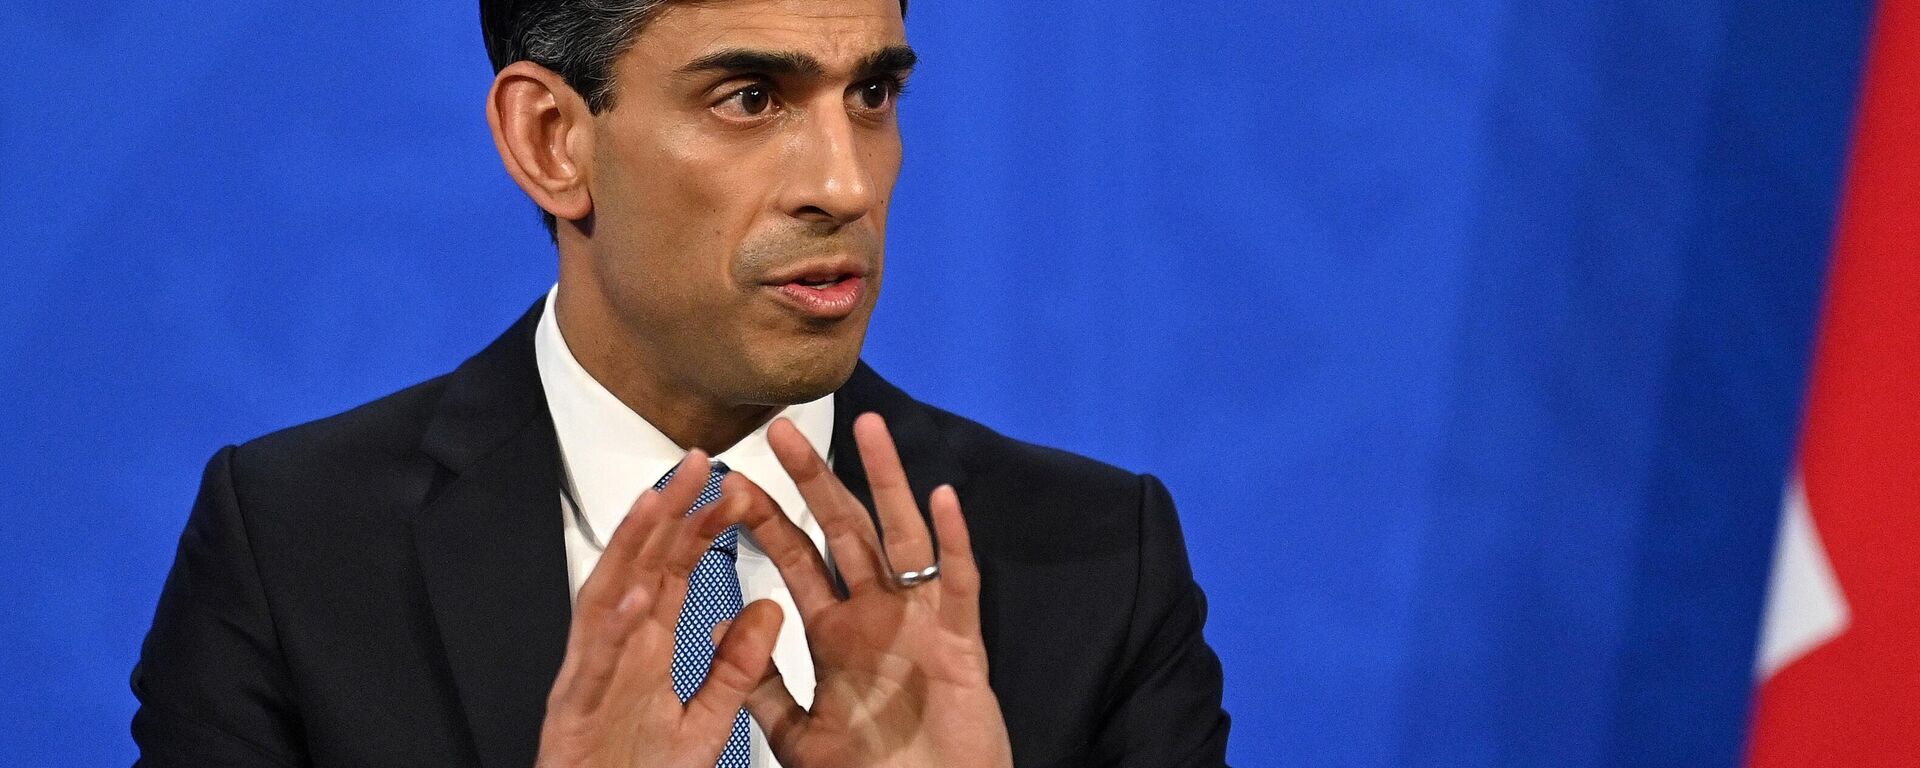 Britain's Chancellor of the Exchequer Rishi Sunak hosts a press conference in the Downing Street Briefing Room on February 3, 2022 - Sputnik International, 1920, 11.07.2022